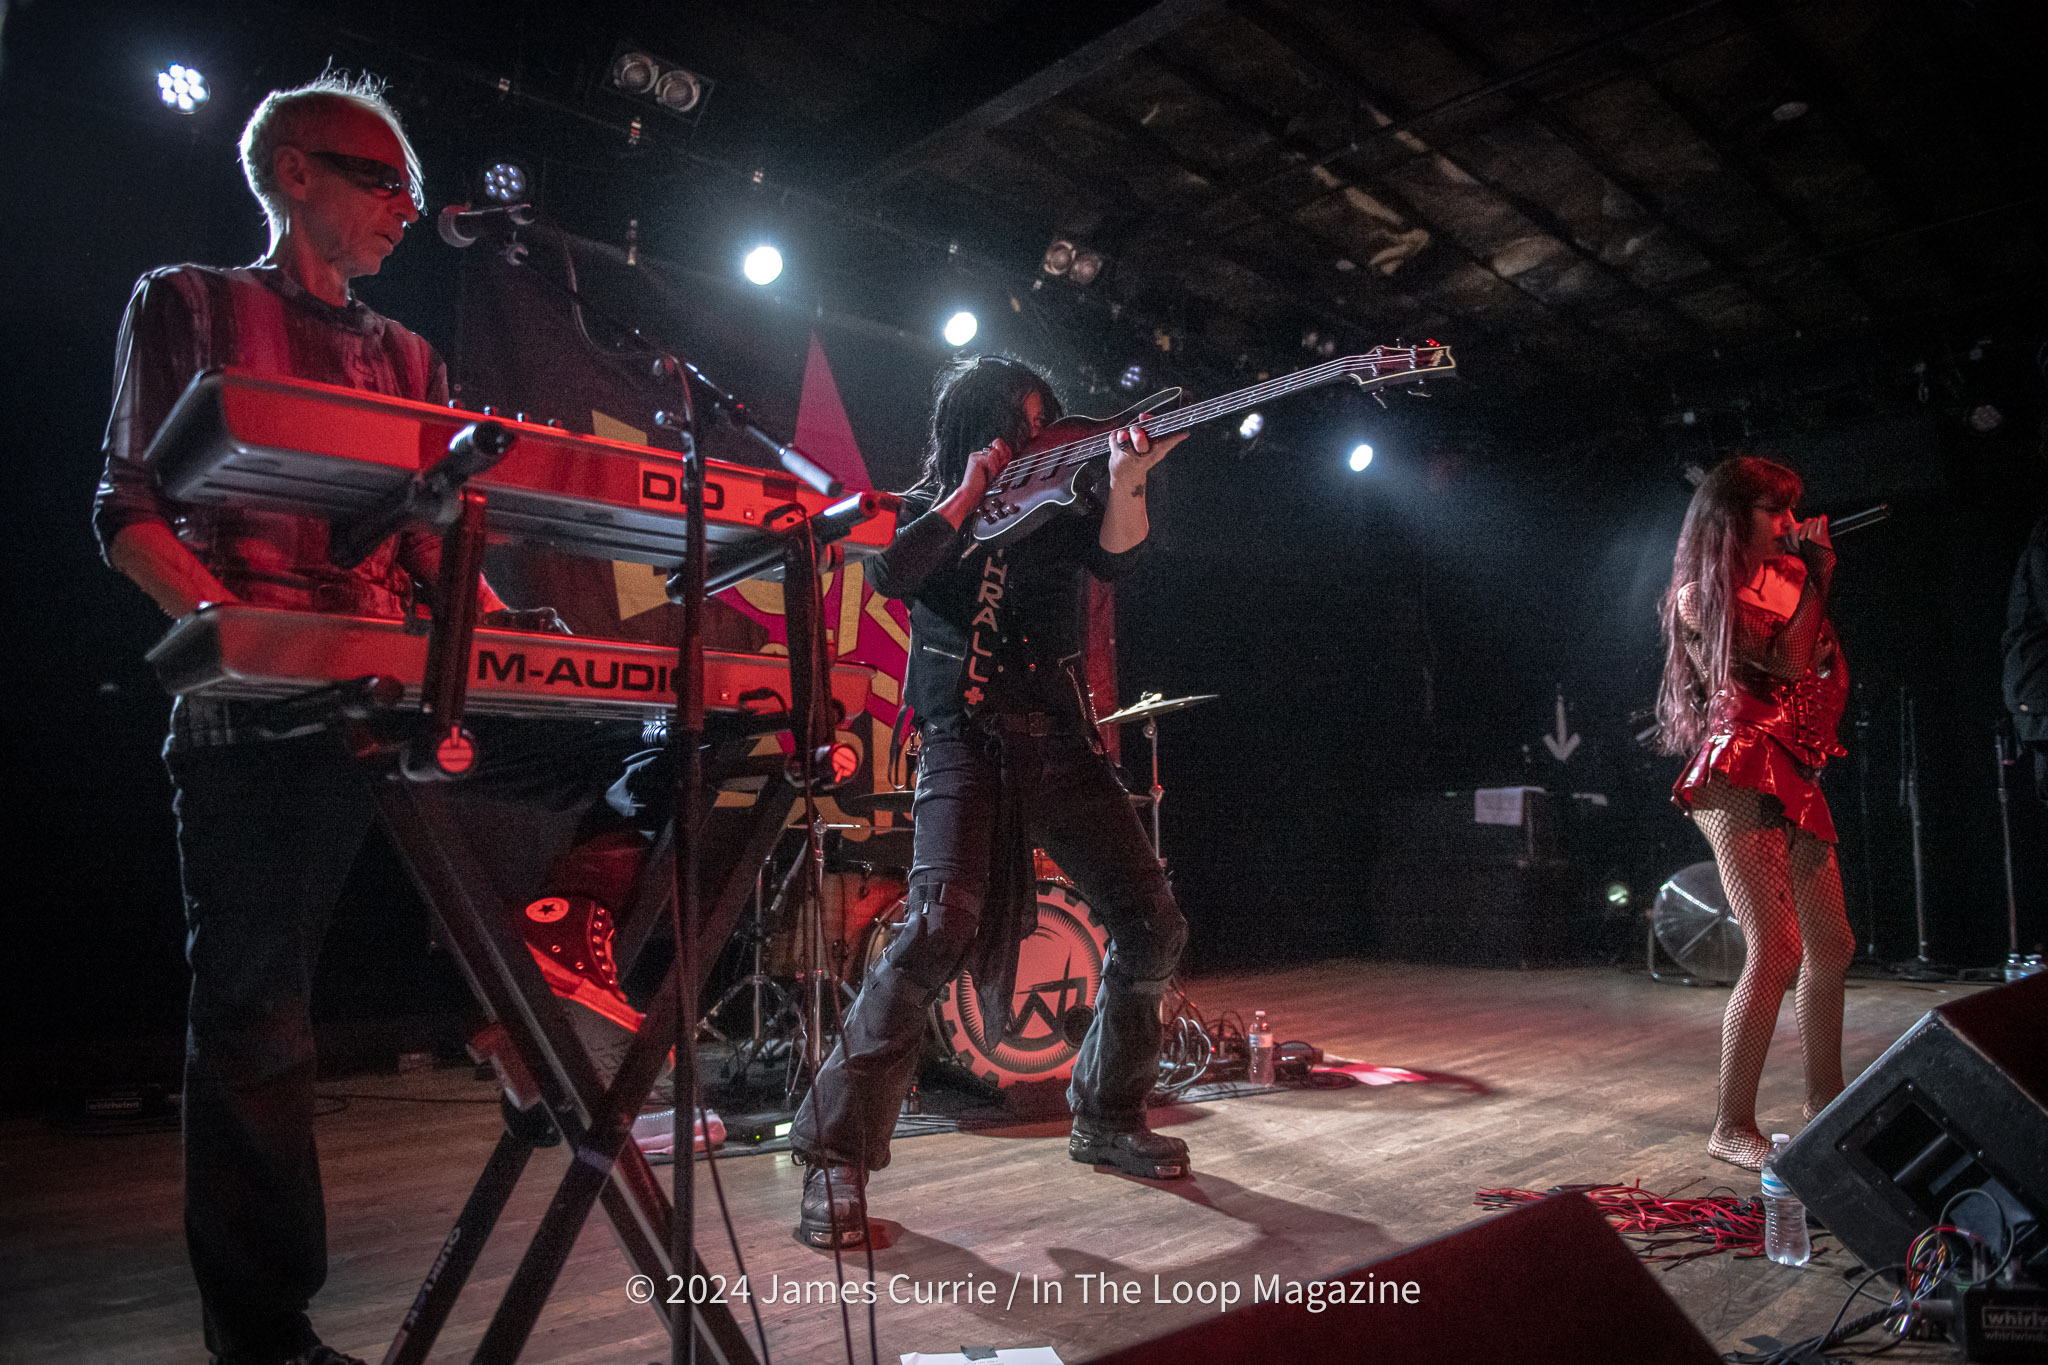 Live Review: Lords of Acid With Praga Kahn Live in Chicago at Bottom Lounge